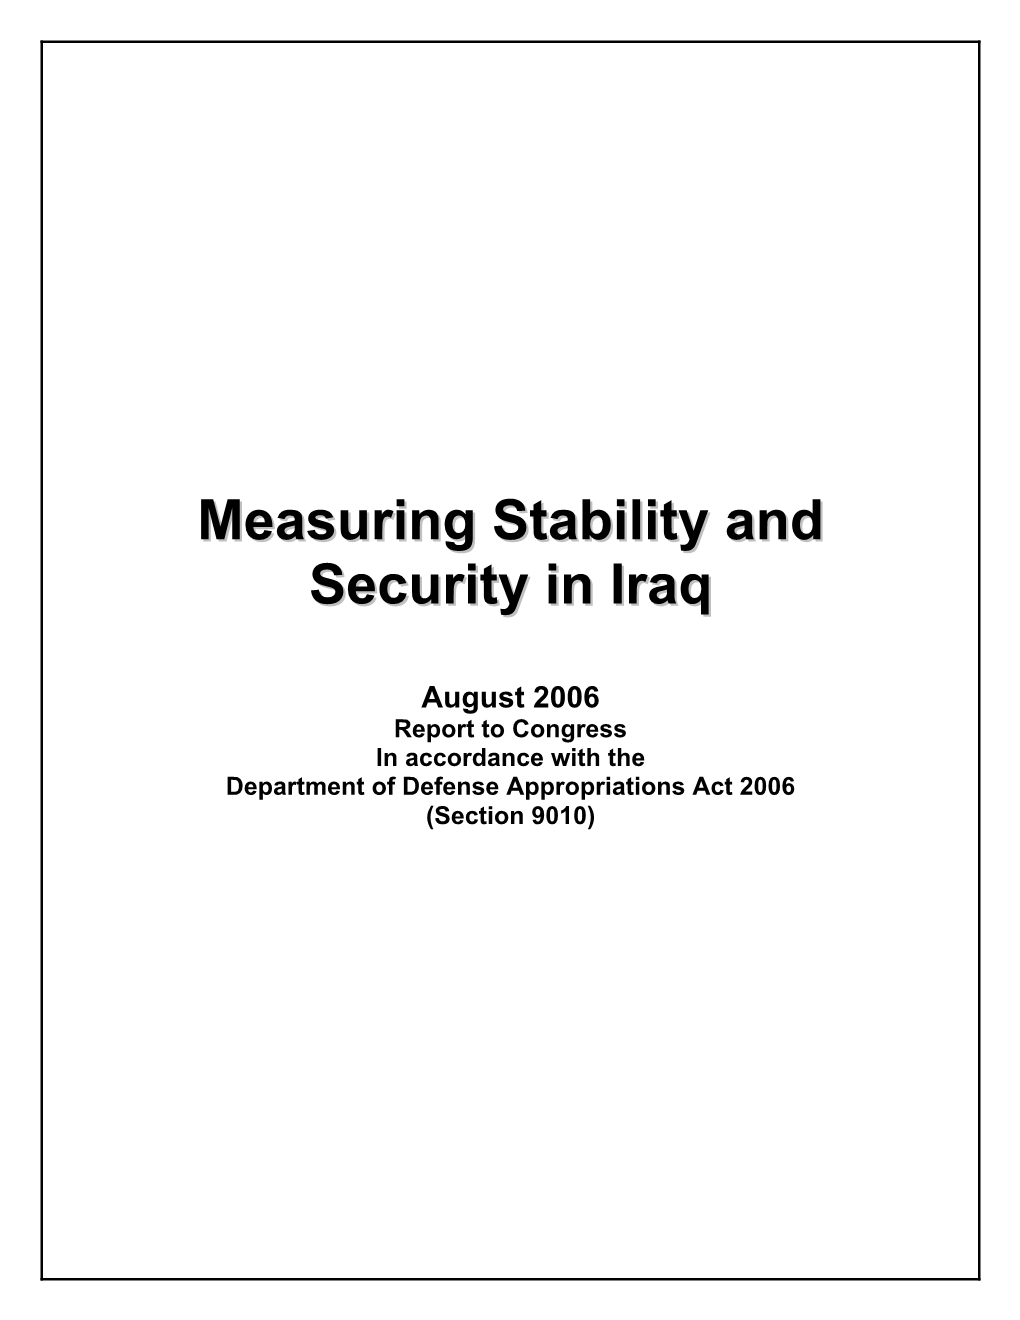 Measuring Stability and Security in Iraq Is Submitted Pursuant to Section 9010 of the Department of Defense Appropriations Act 2006, Public Law 109-148